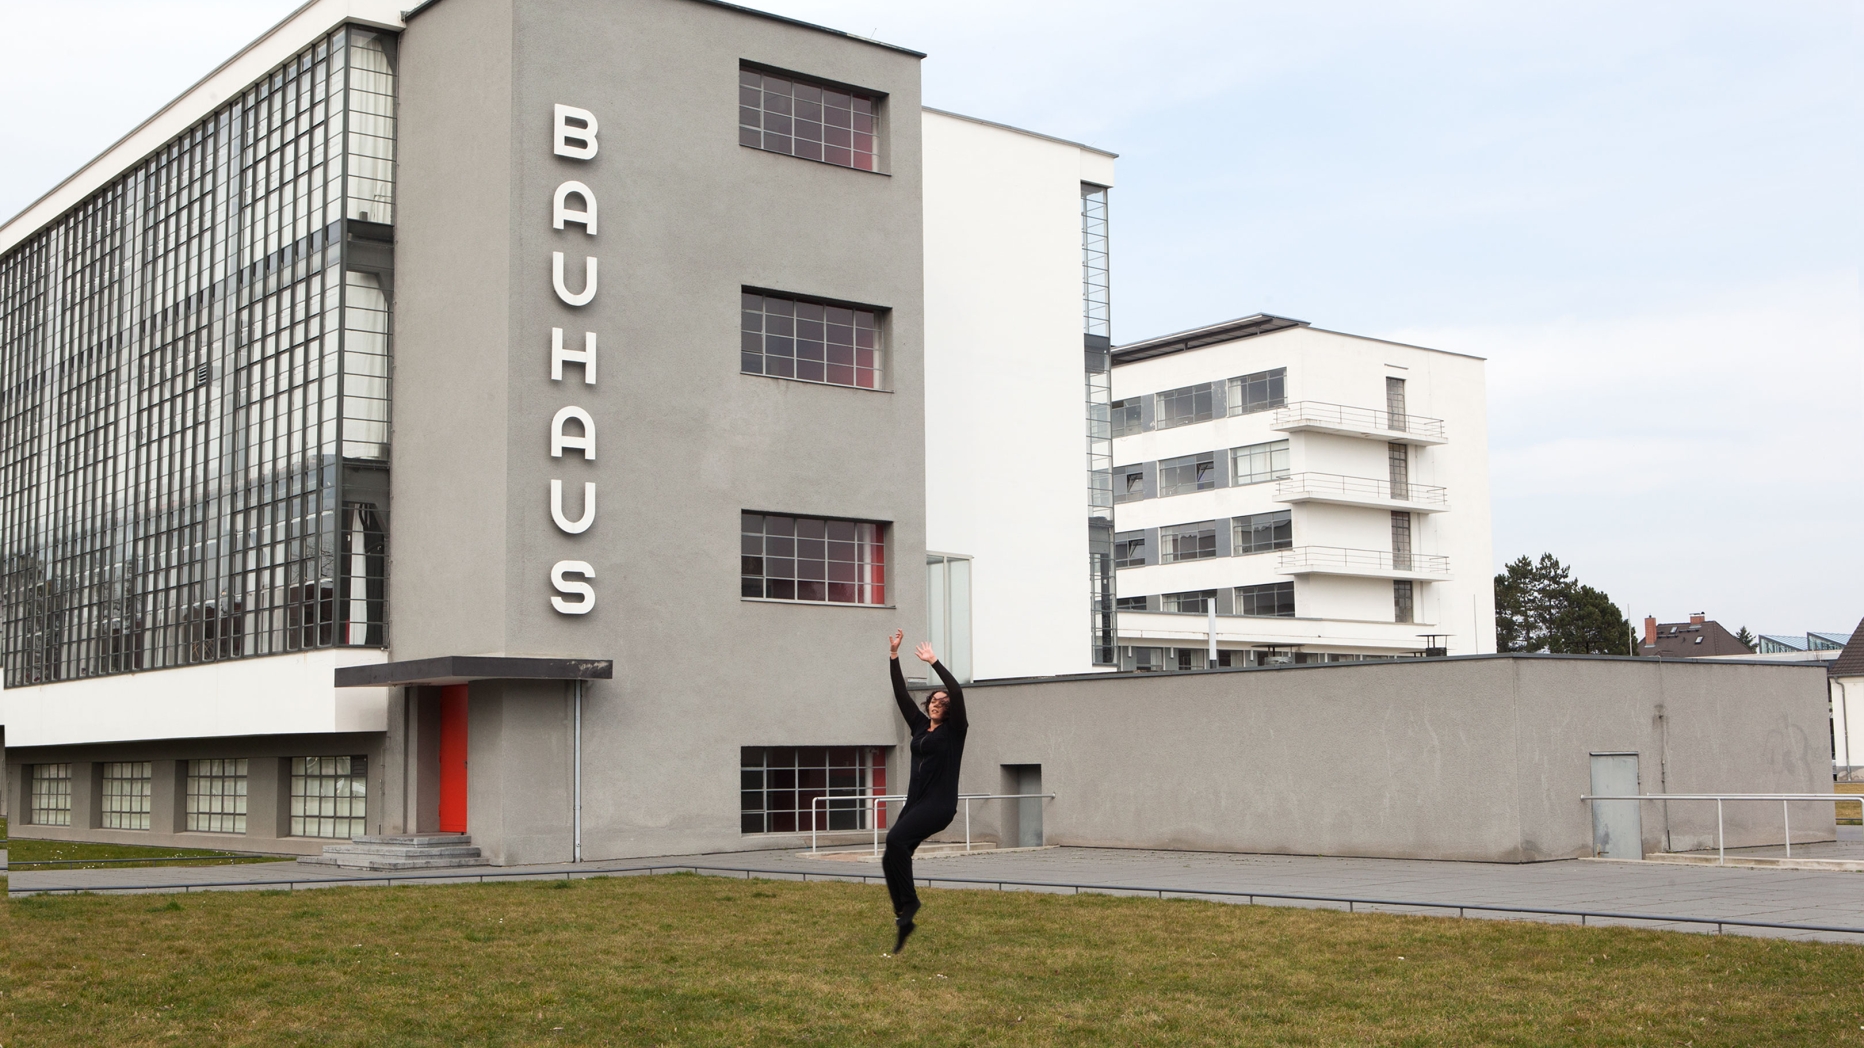 Student dancing on lawn in front of building with large sign saying "Bauhaus".